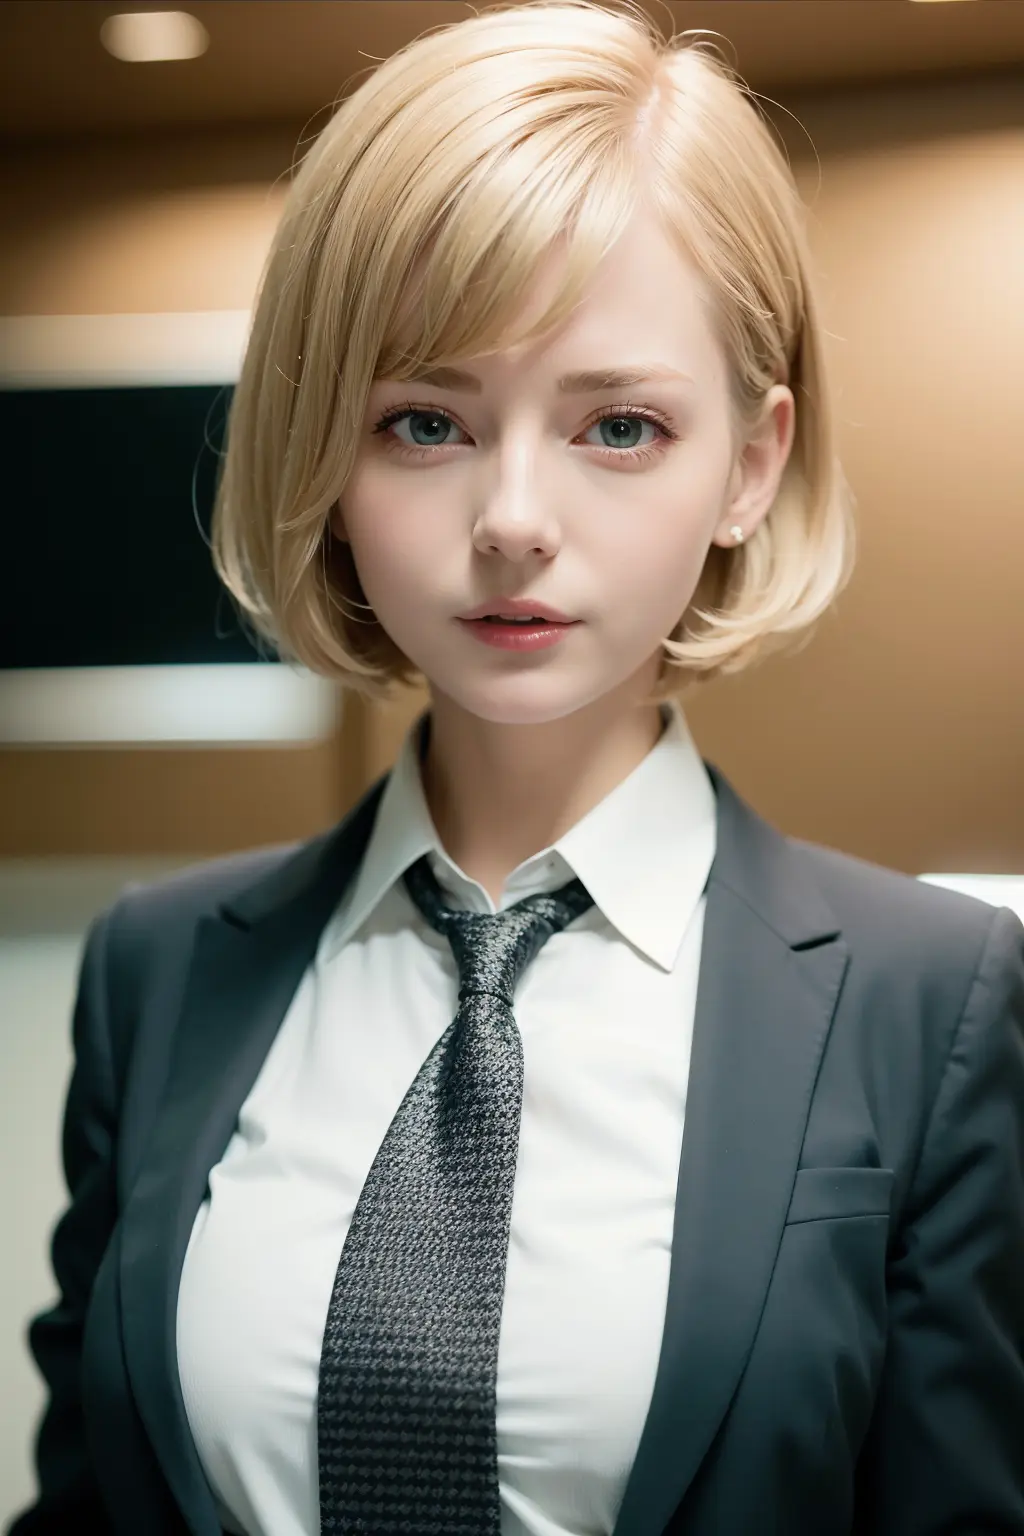 Closeup Photo Of A Girl Short Hair Blond Hair Wearing A Business Suit Standing In An Office